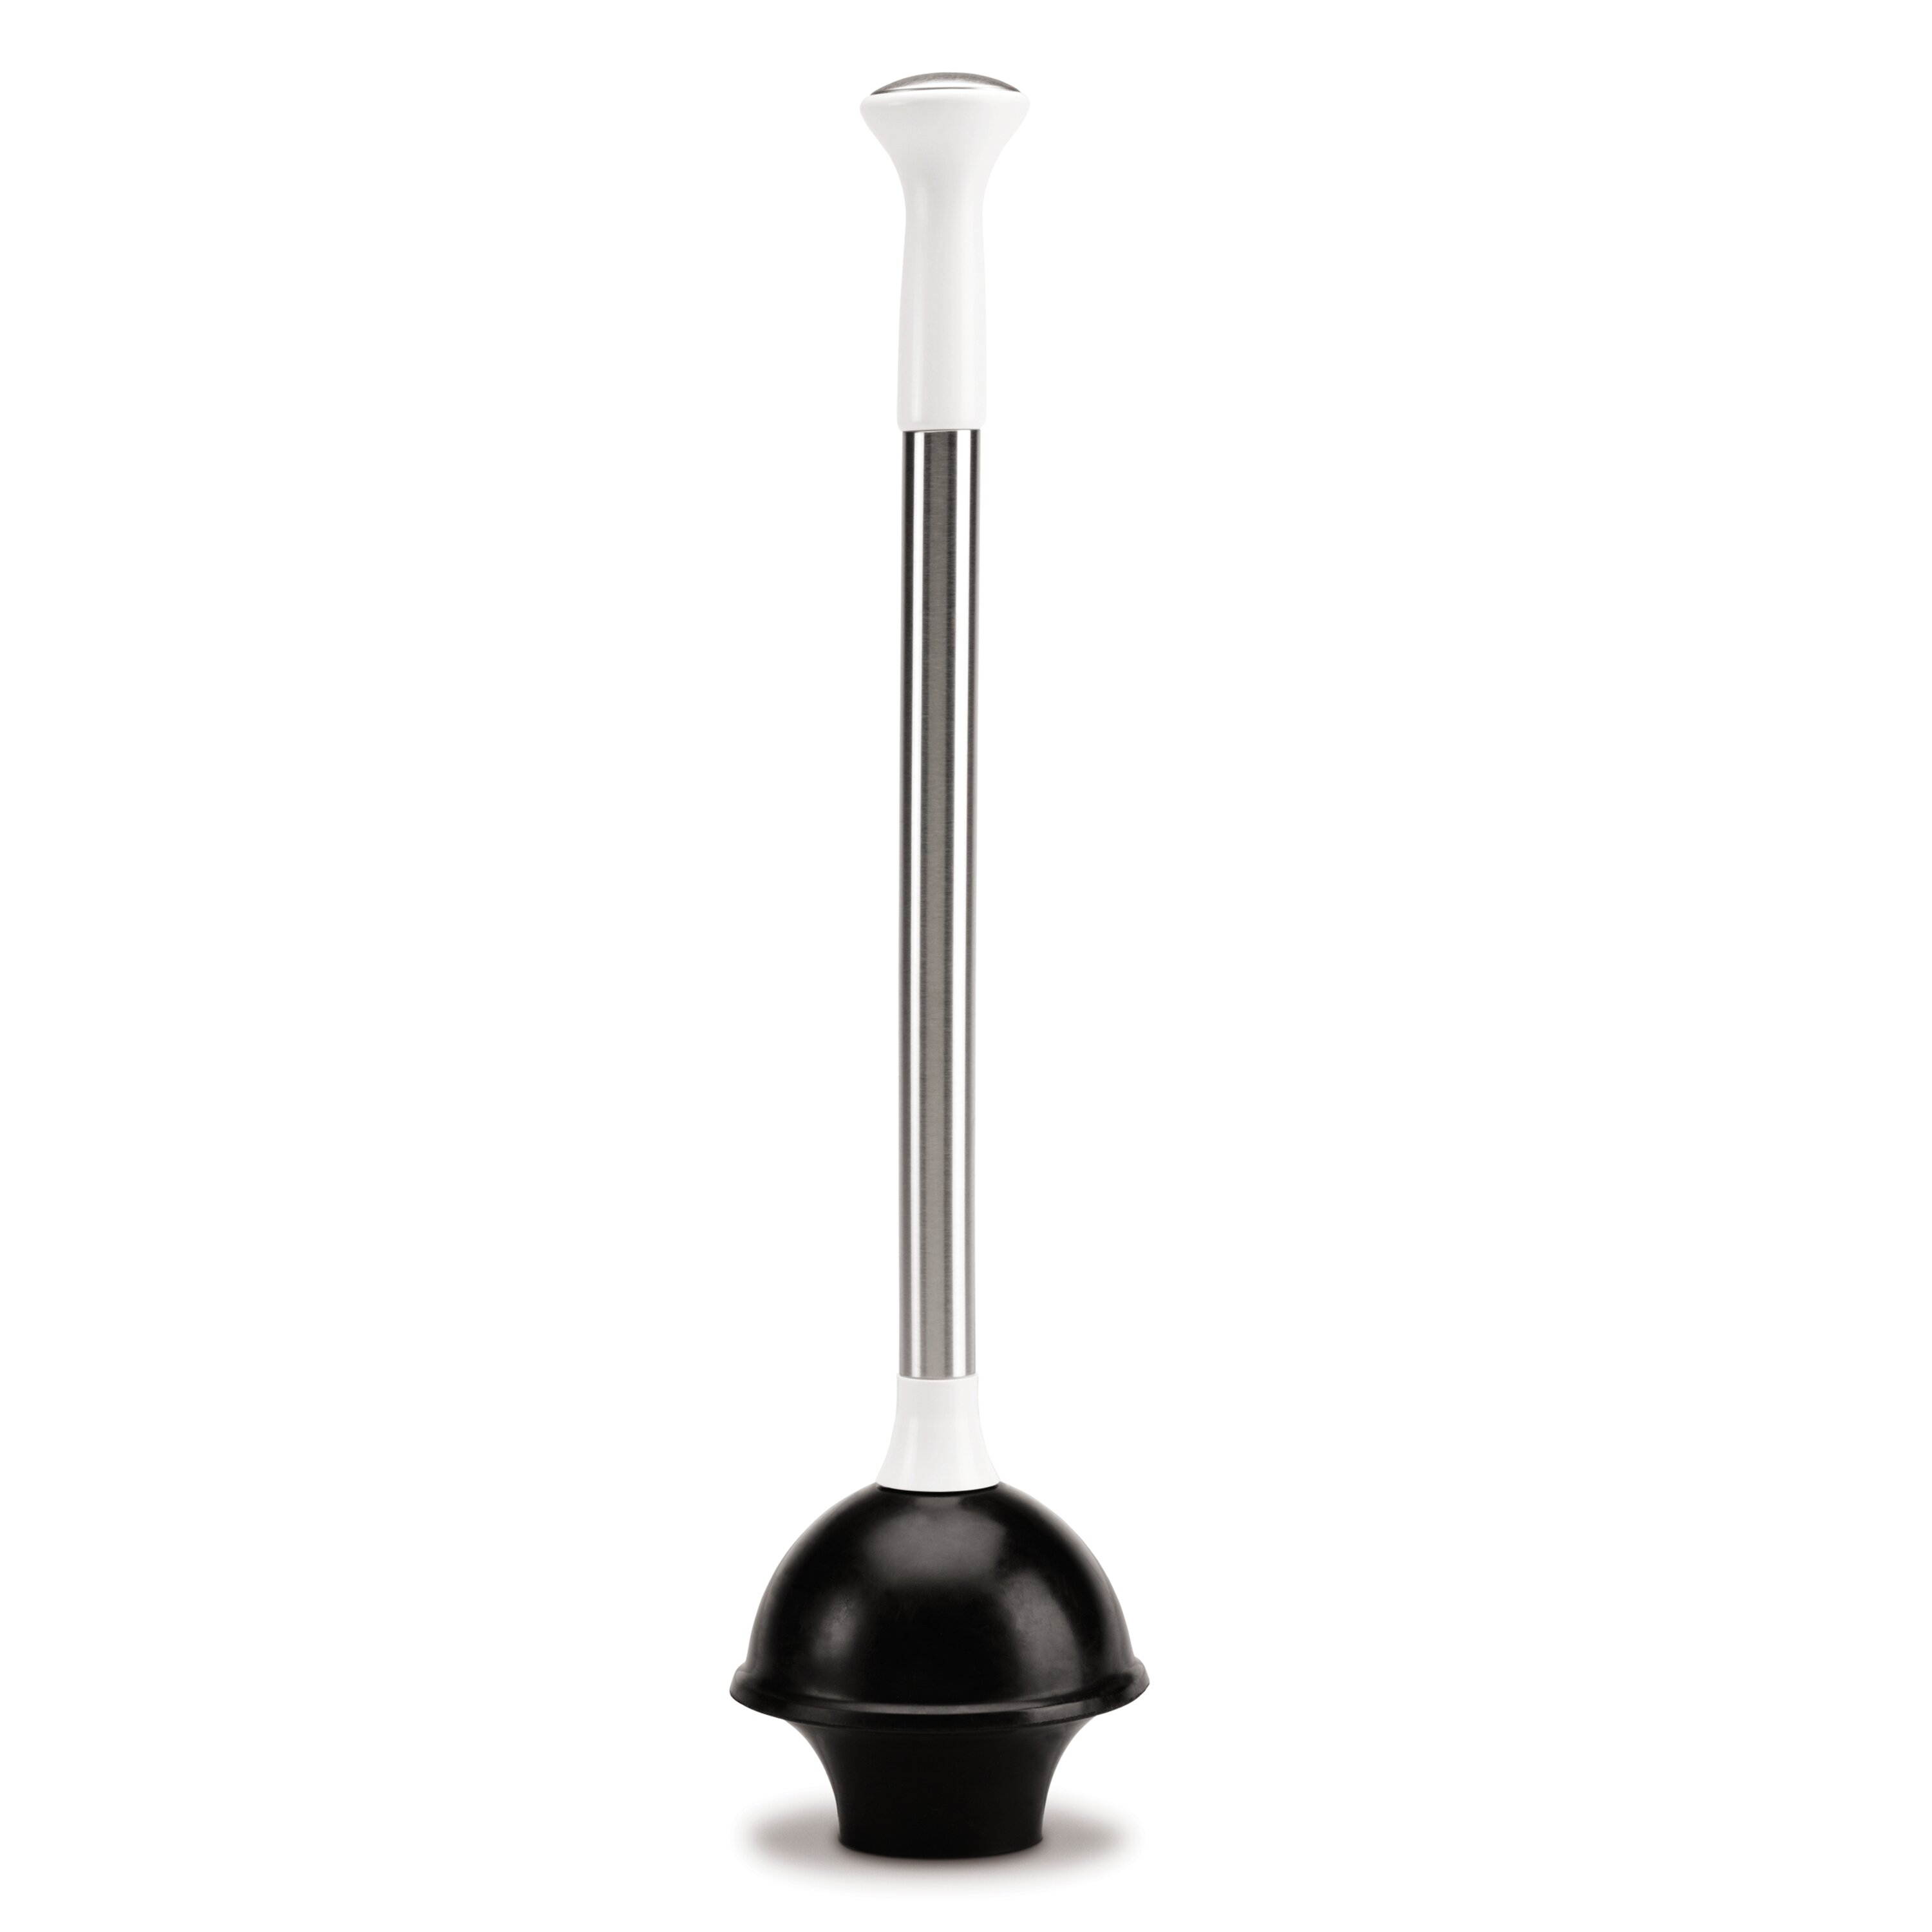  simplehuman Toilet Brush with Caddy Stainless Steel, Black :  Home & Kitchen